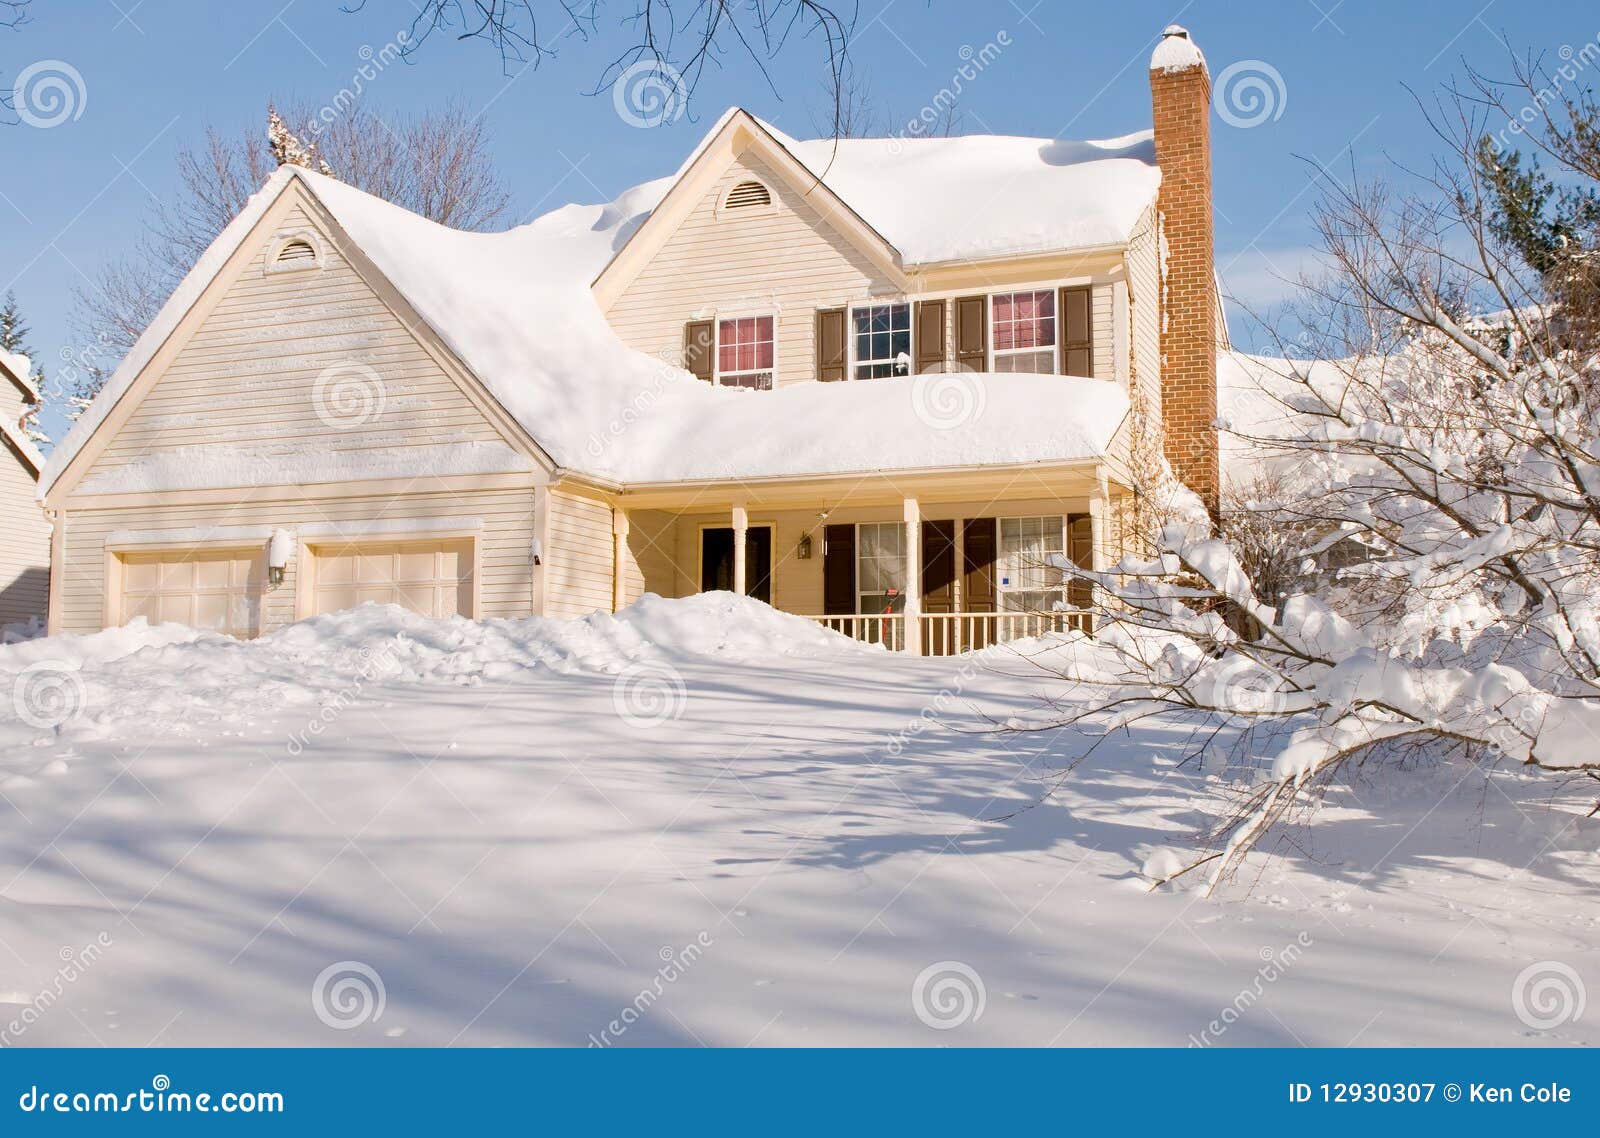 house covered in winter snow